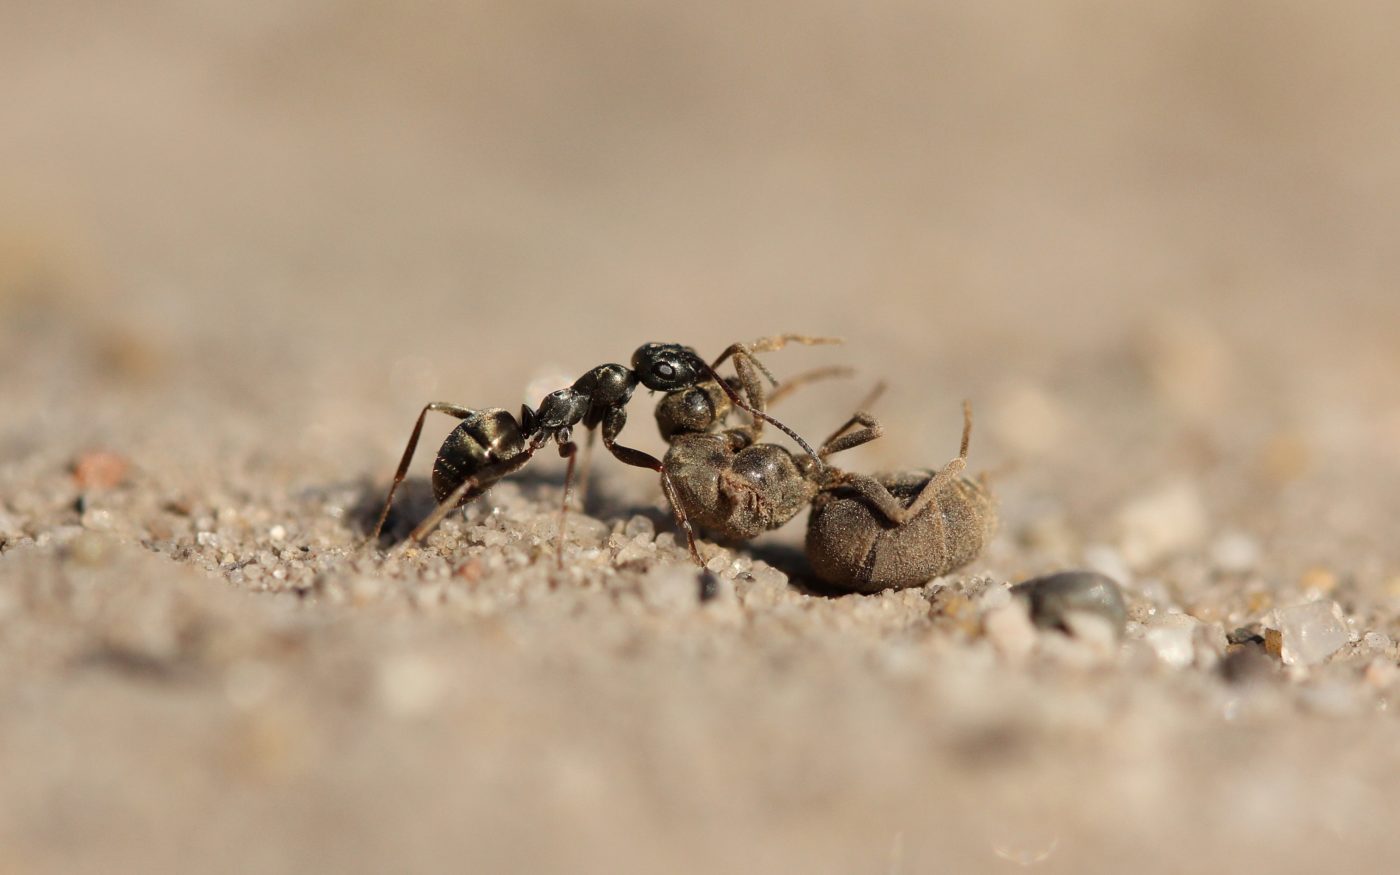 Western Honey bee, Apis mellifera, covered in dust, and an Ant